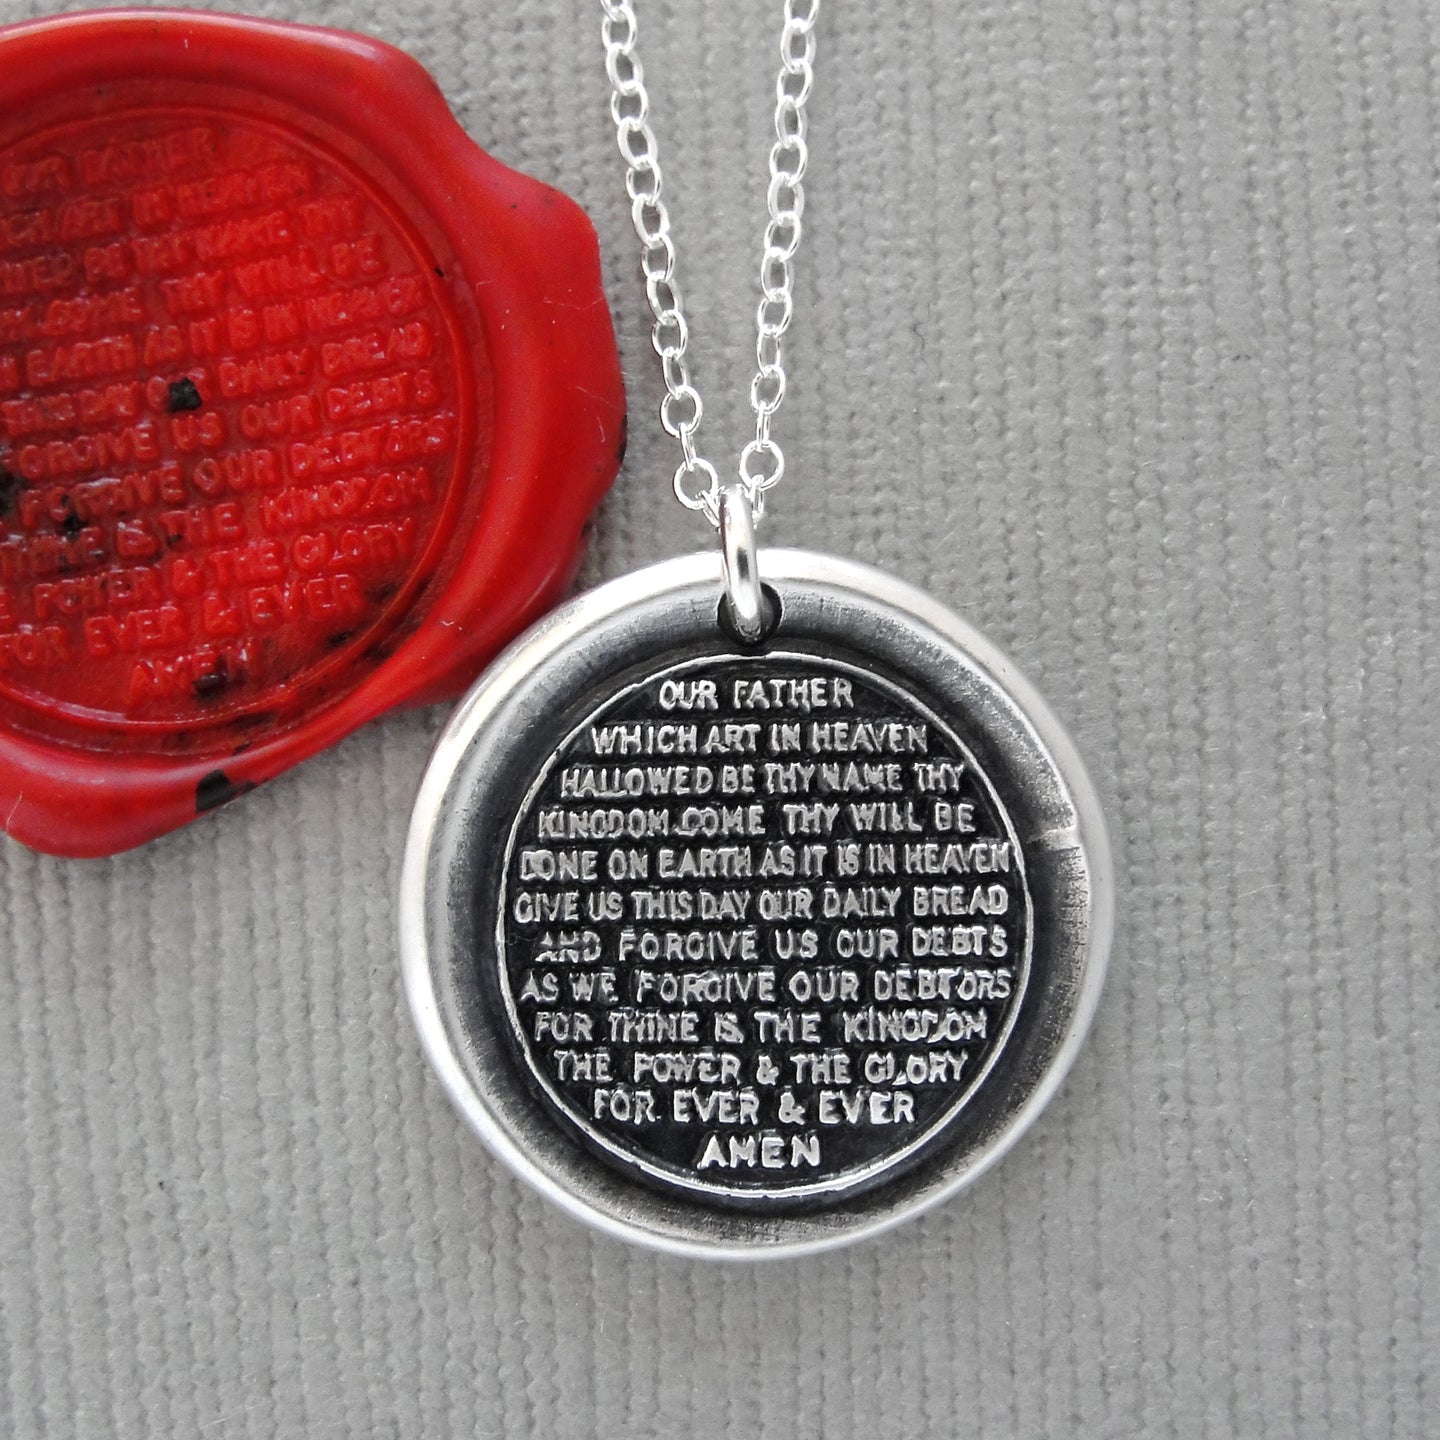 Lord's Prayer Wax Seal Necklace - Antique Silver Wax Seal Charm Jewelry Our Father